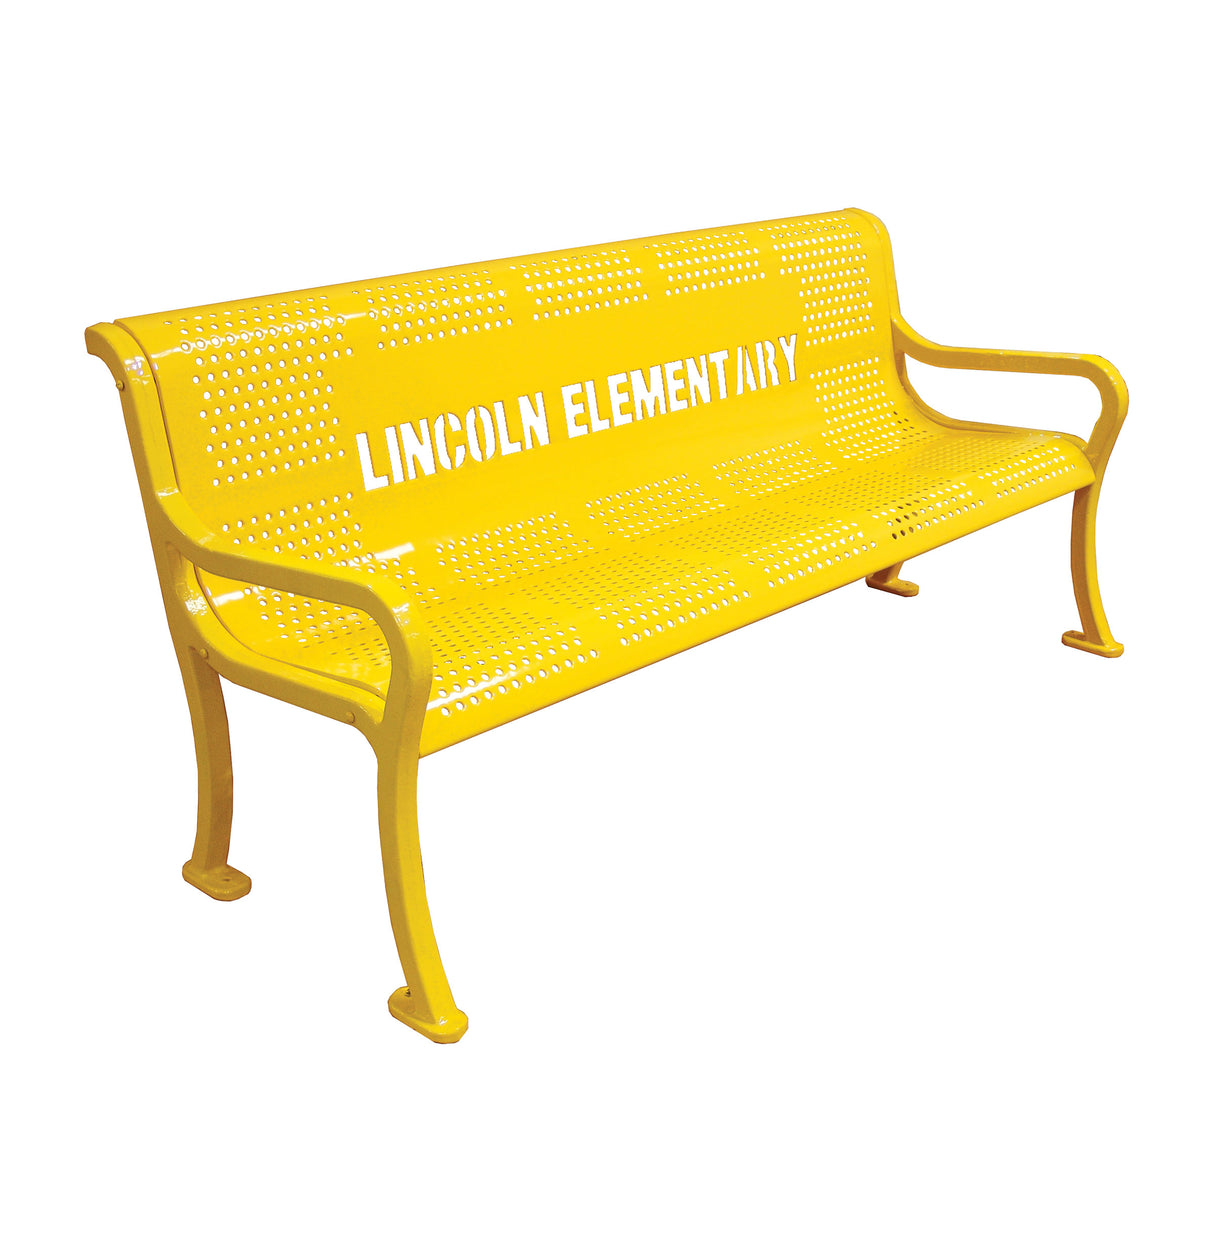 Personalized Perforated Bench